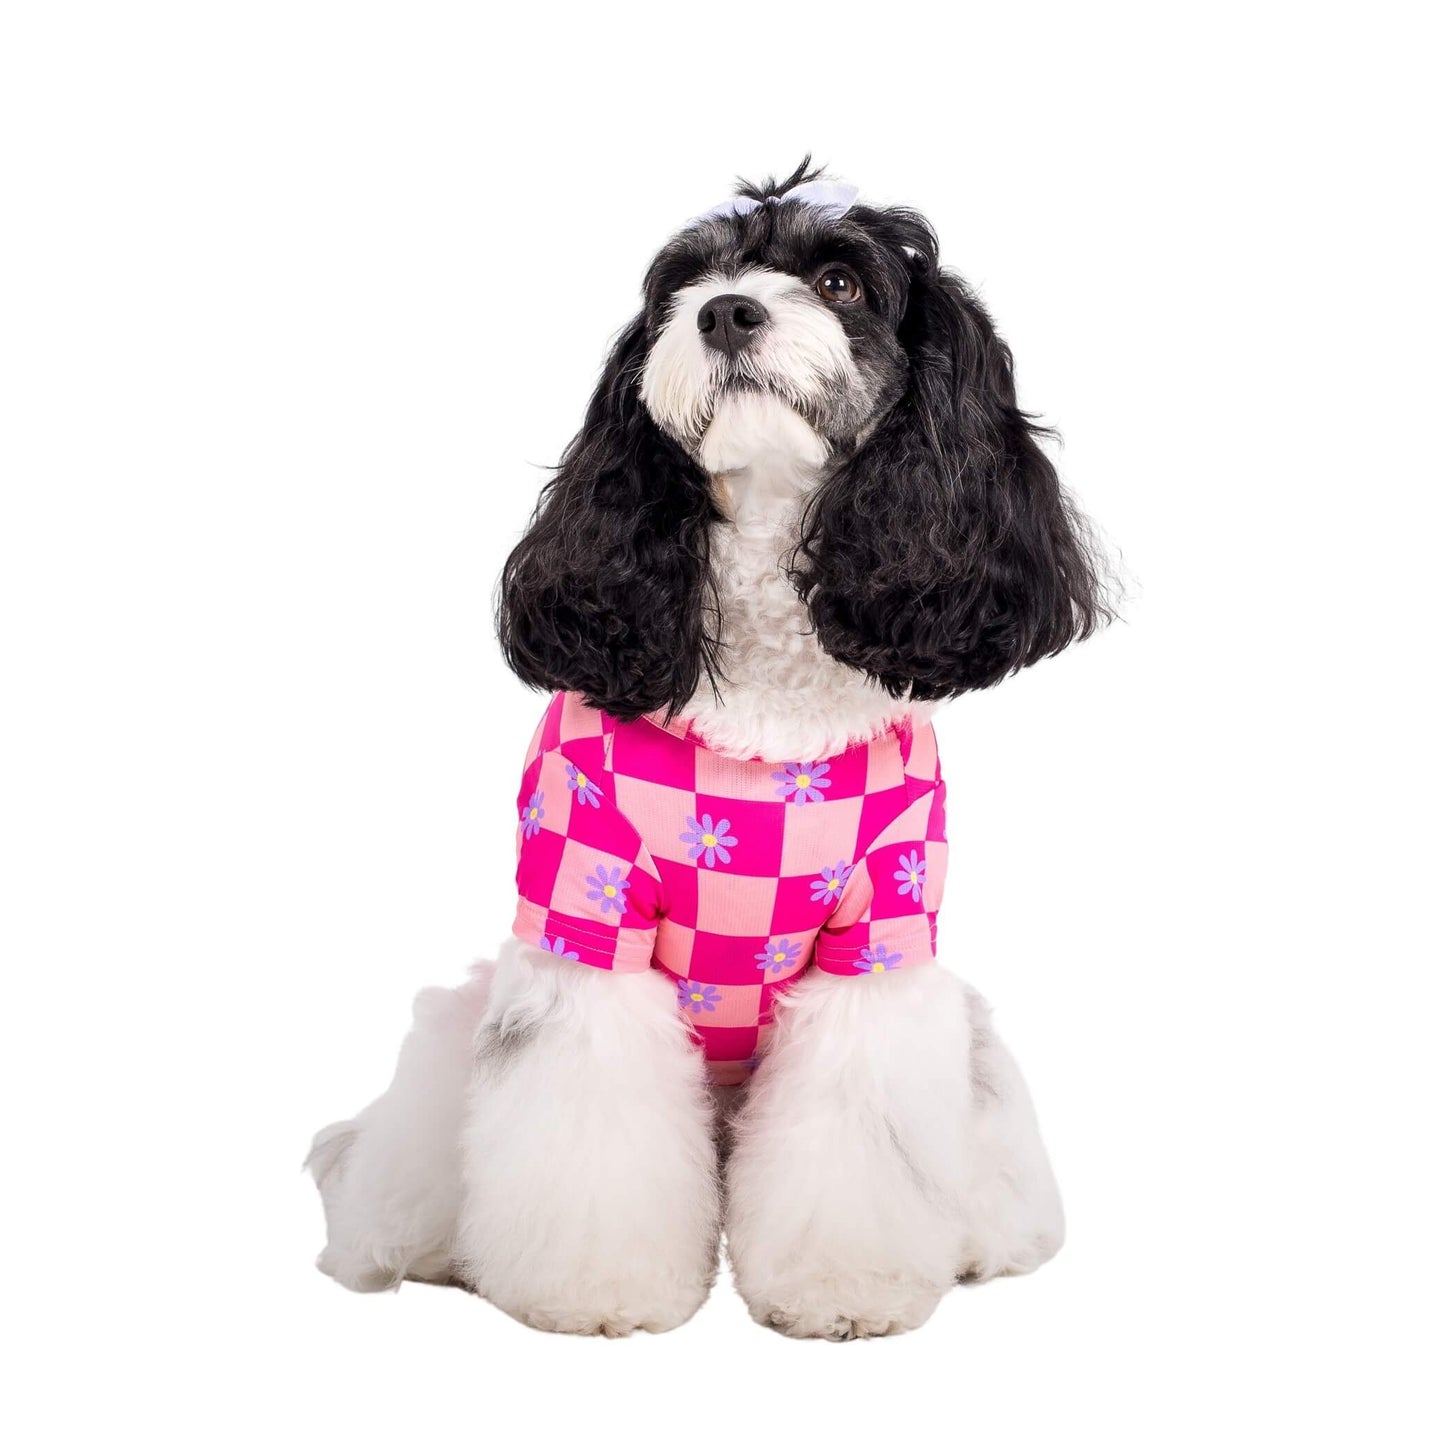 Cavoodle wearing Vibrant Hounds Crazy Daisy cooling shirt for dogs. It is pink chequered with daisys printed on it.